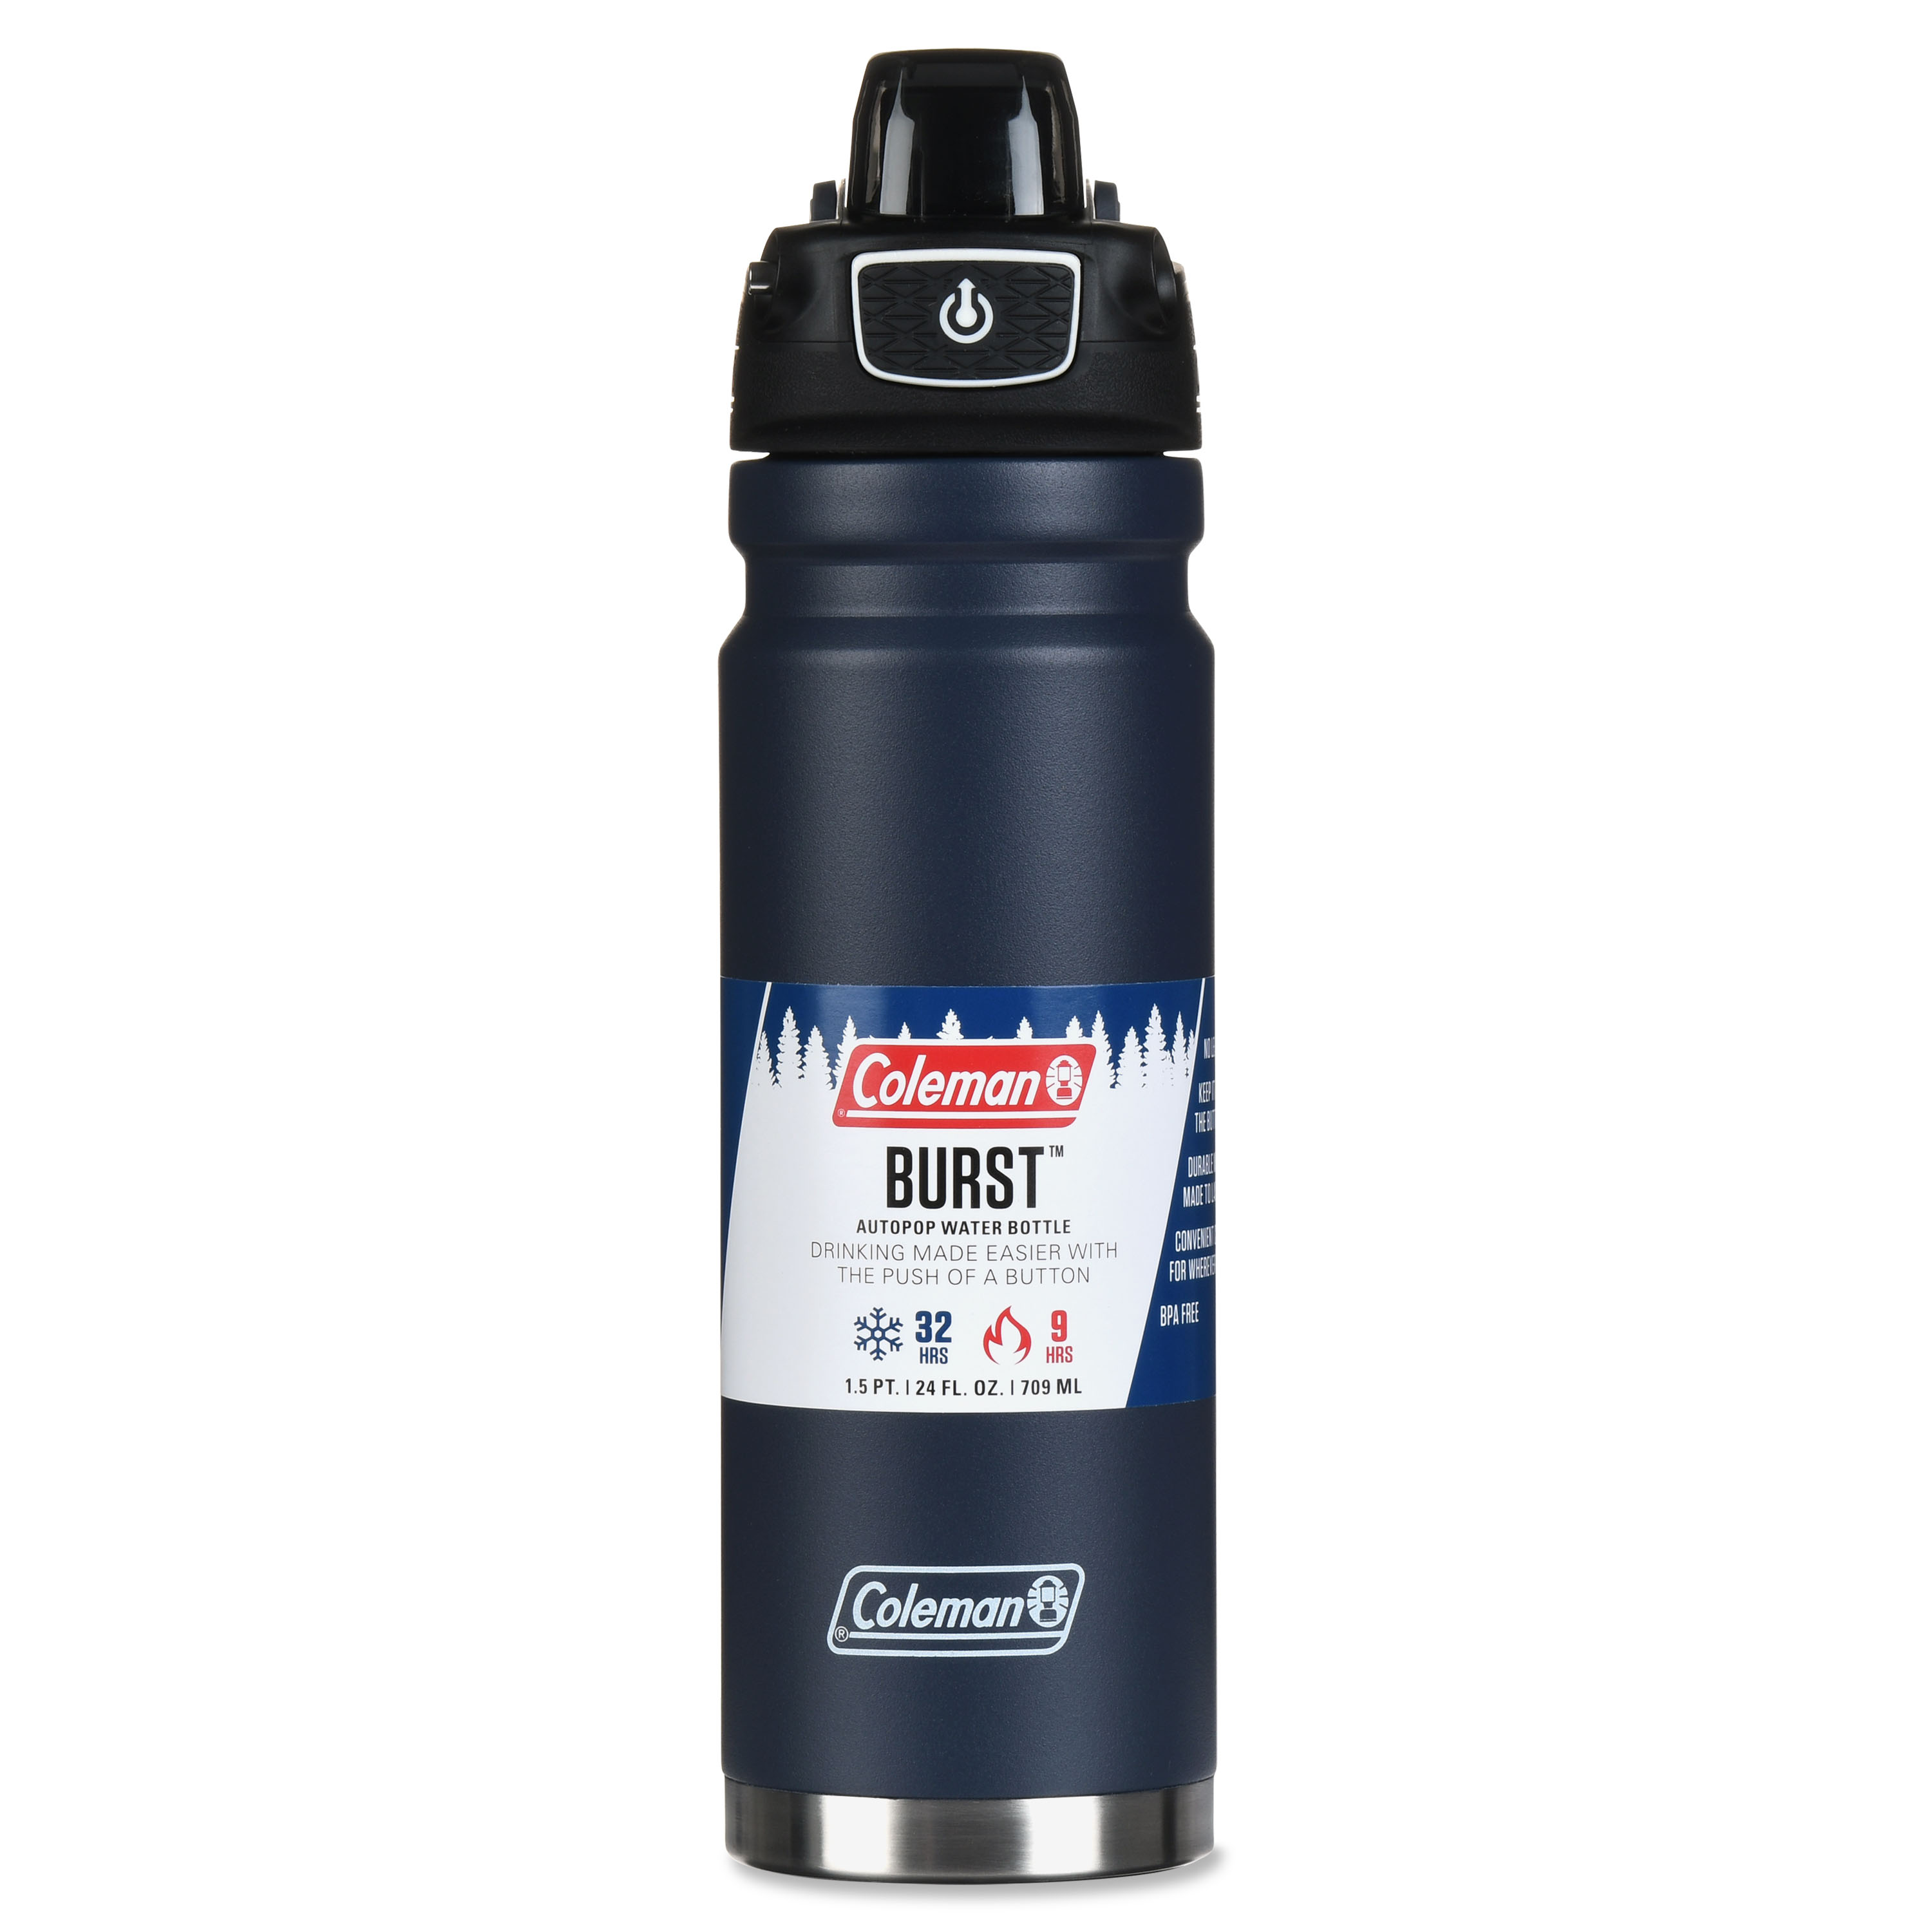 Coleman Burst Poptop Stainless Steel Insulated Water Bottle, 24 oz, Blue Nights - image 5 of 7